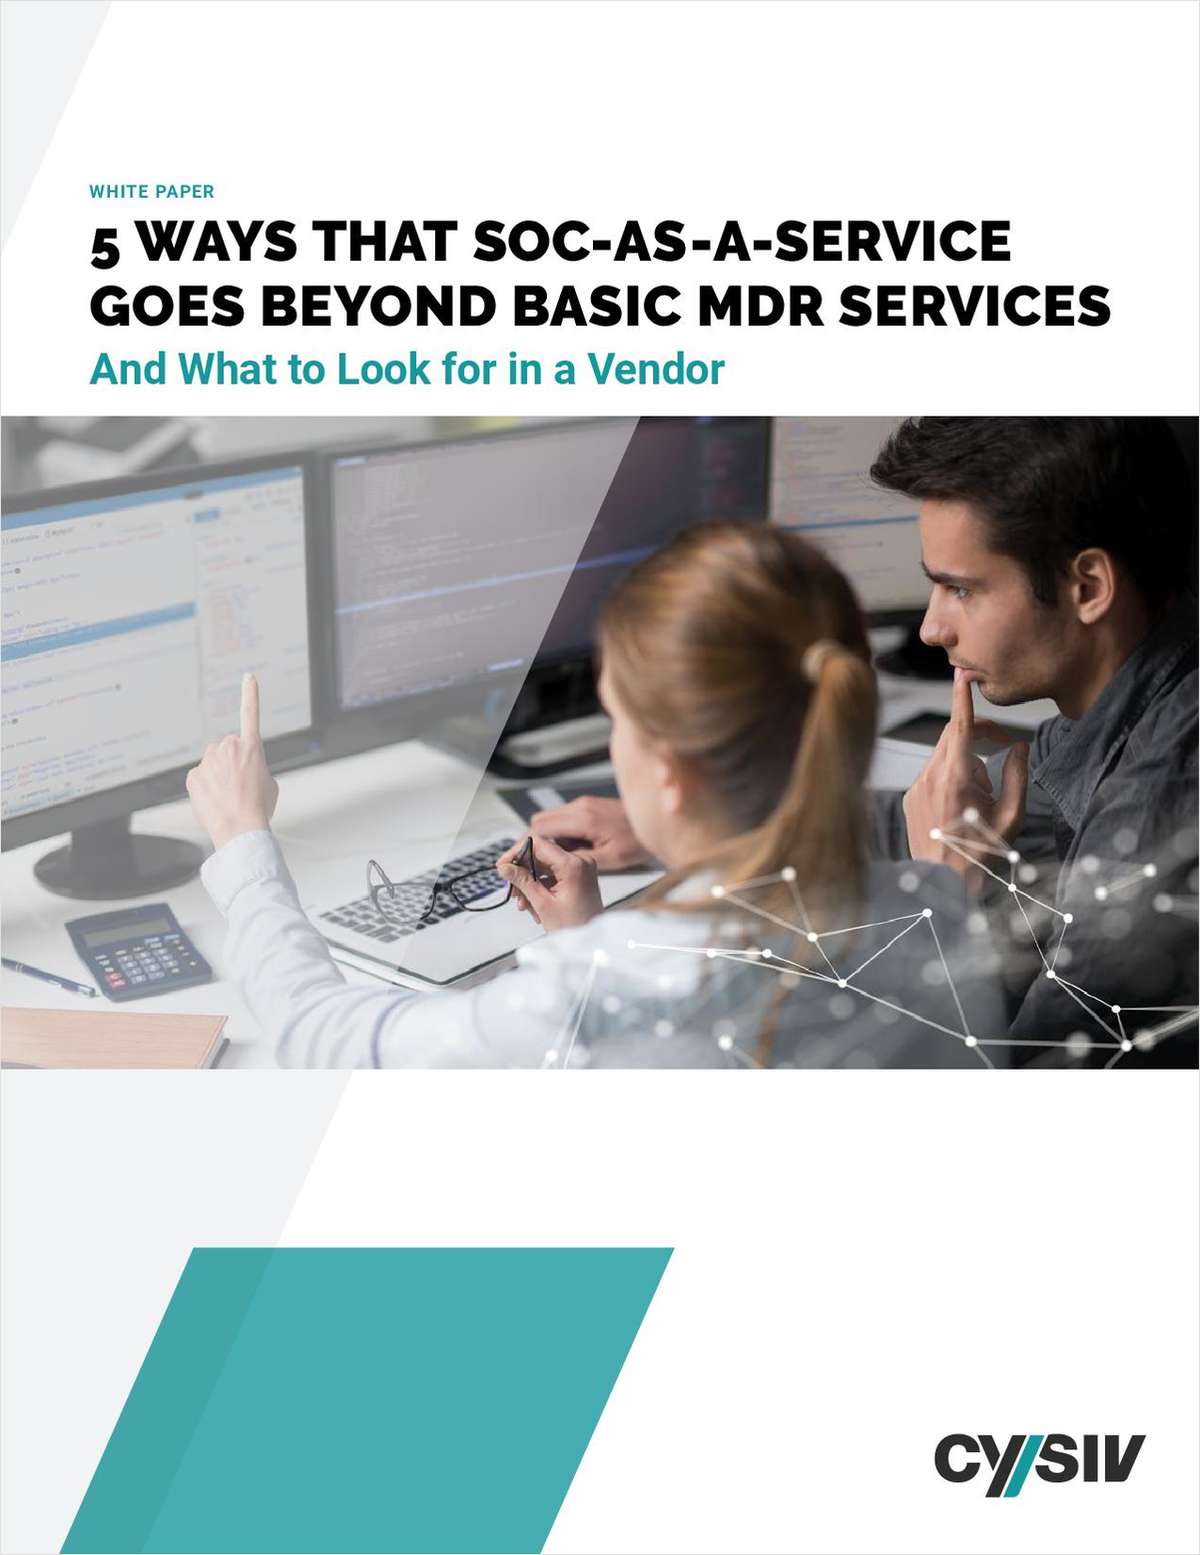 5 WAYS THAT SOC-AS-A-SERVICE GOES BEYOND BASIC MDR SERVICES